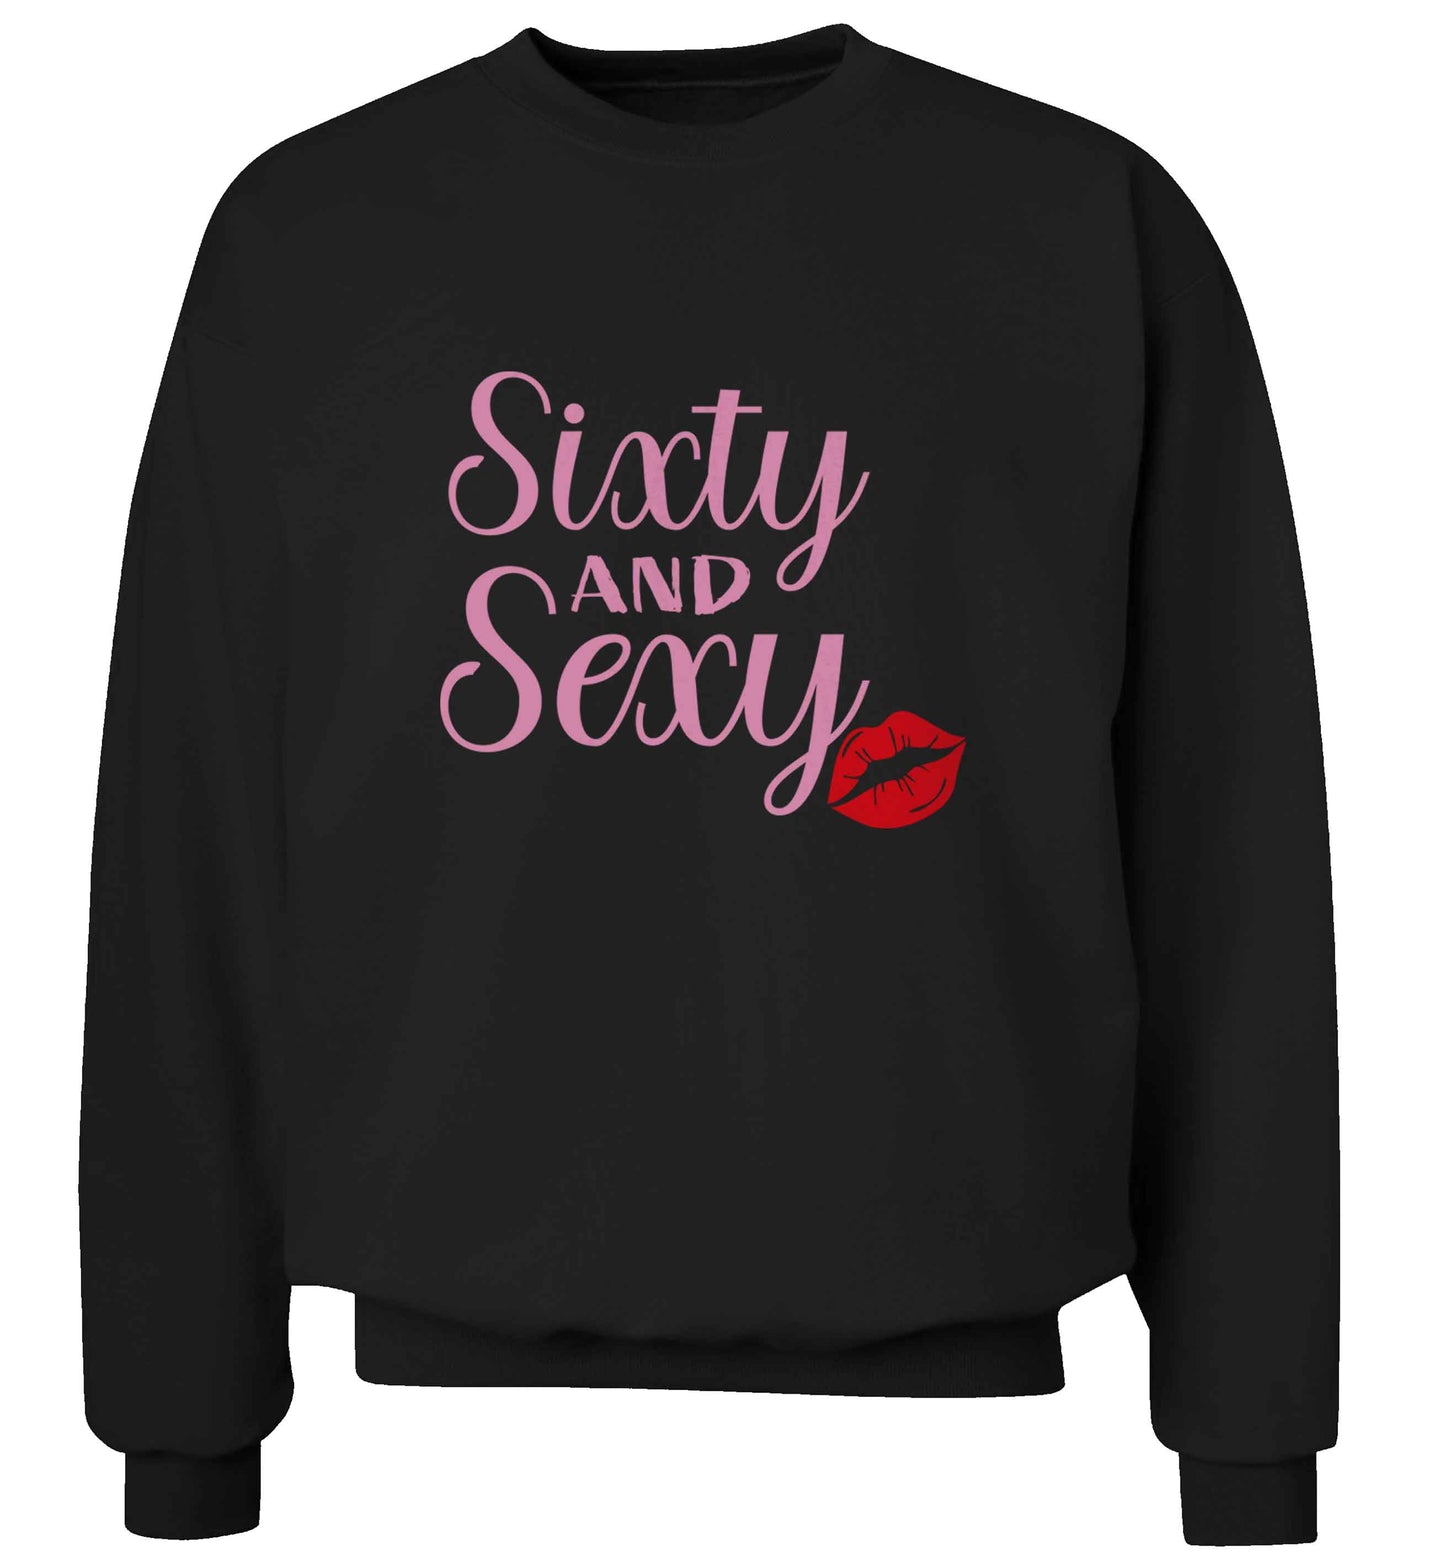 Sixty and sexy adult's unisex black sweater 2XL